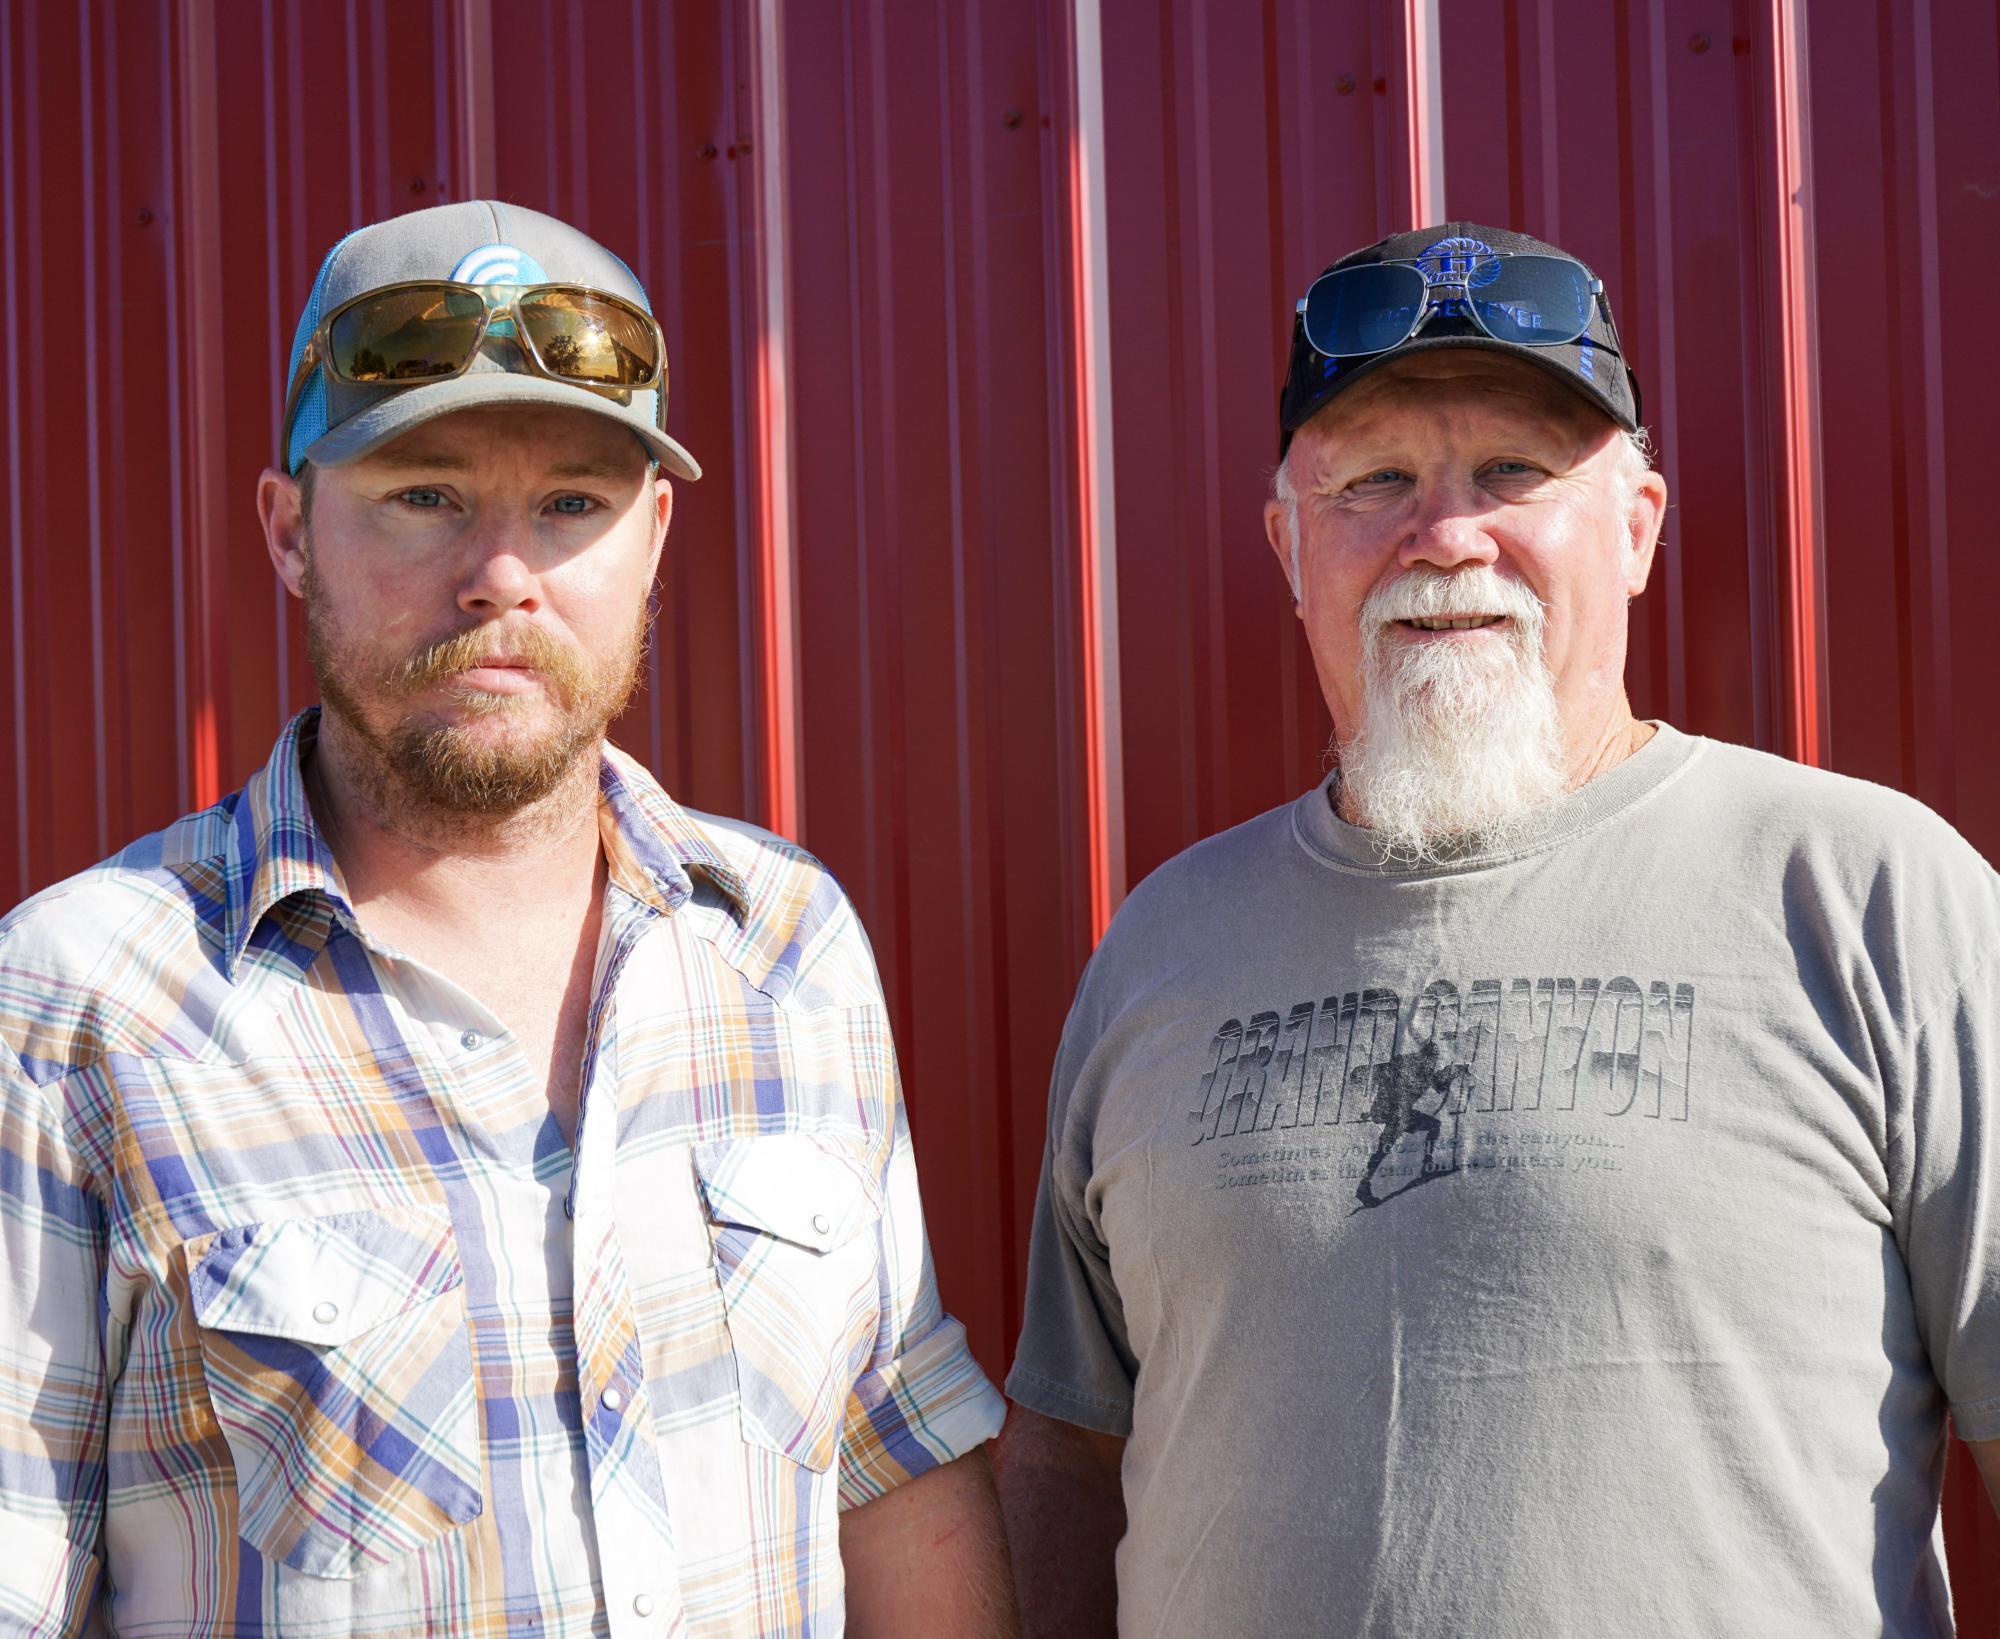 Father and son farming duo to be honored for conservation practices ...